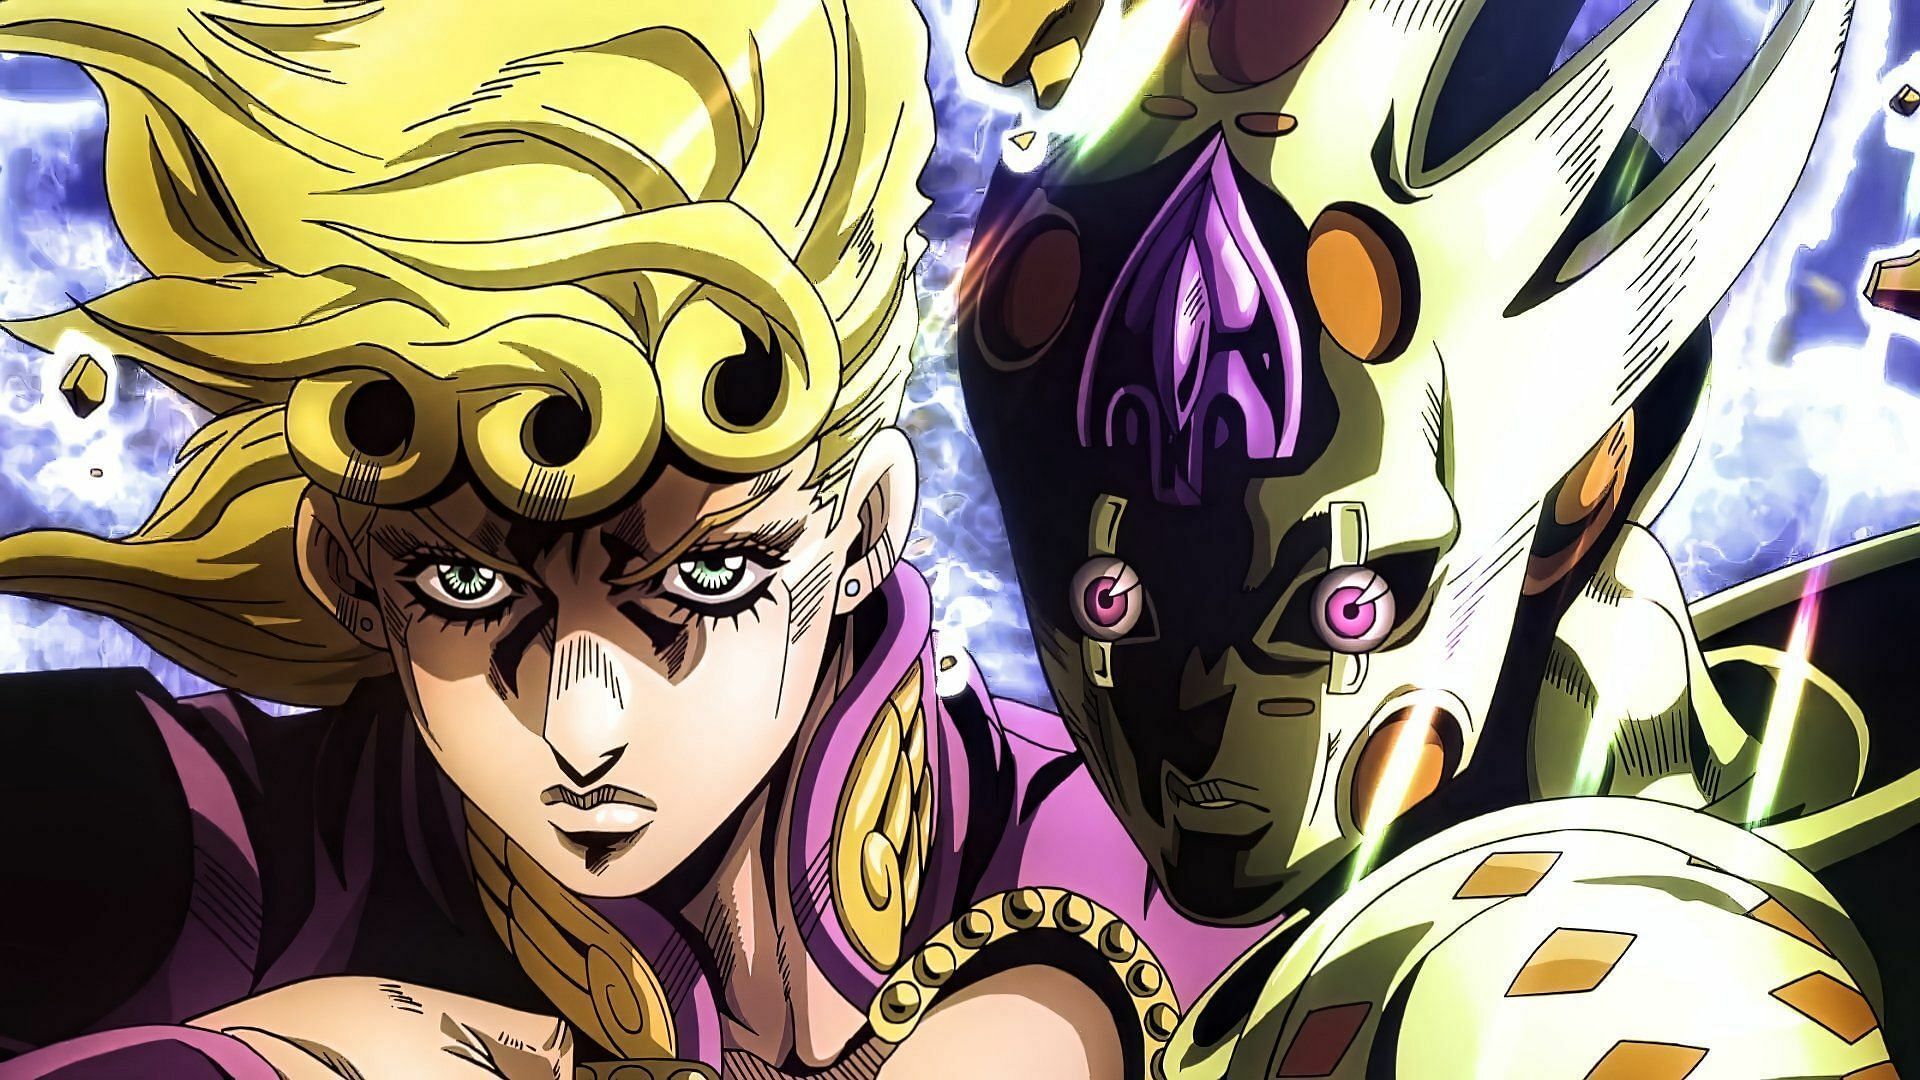 Giorno Giovanna as seen in the Golden Wind anime series (Image via David Productions)